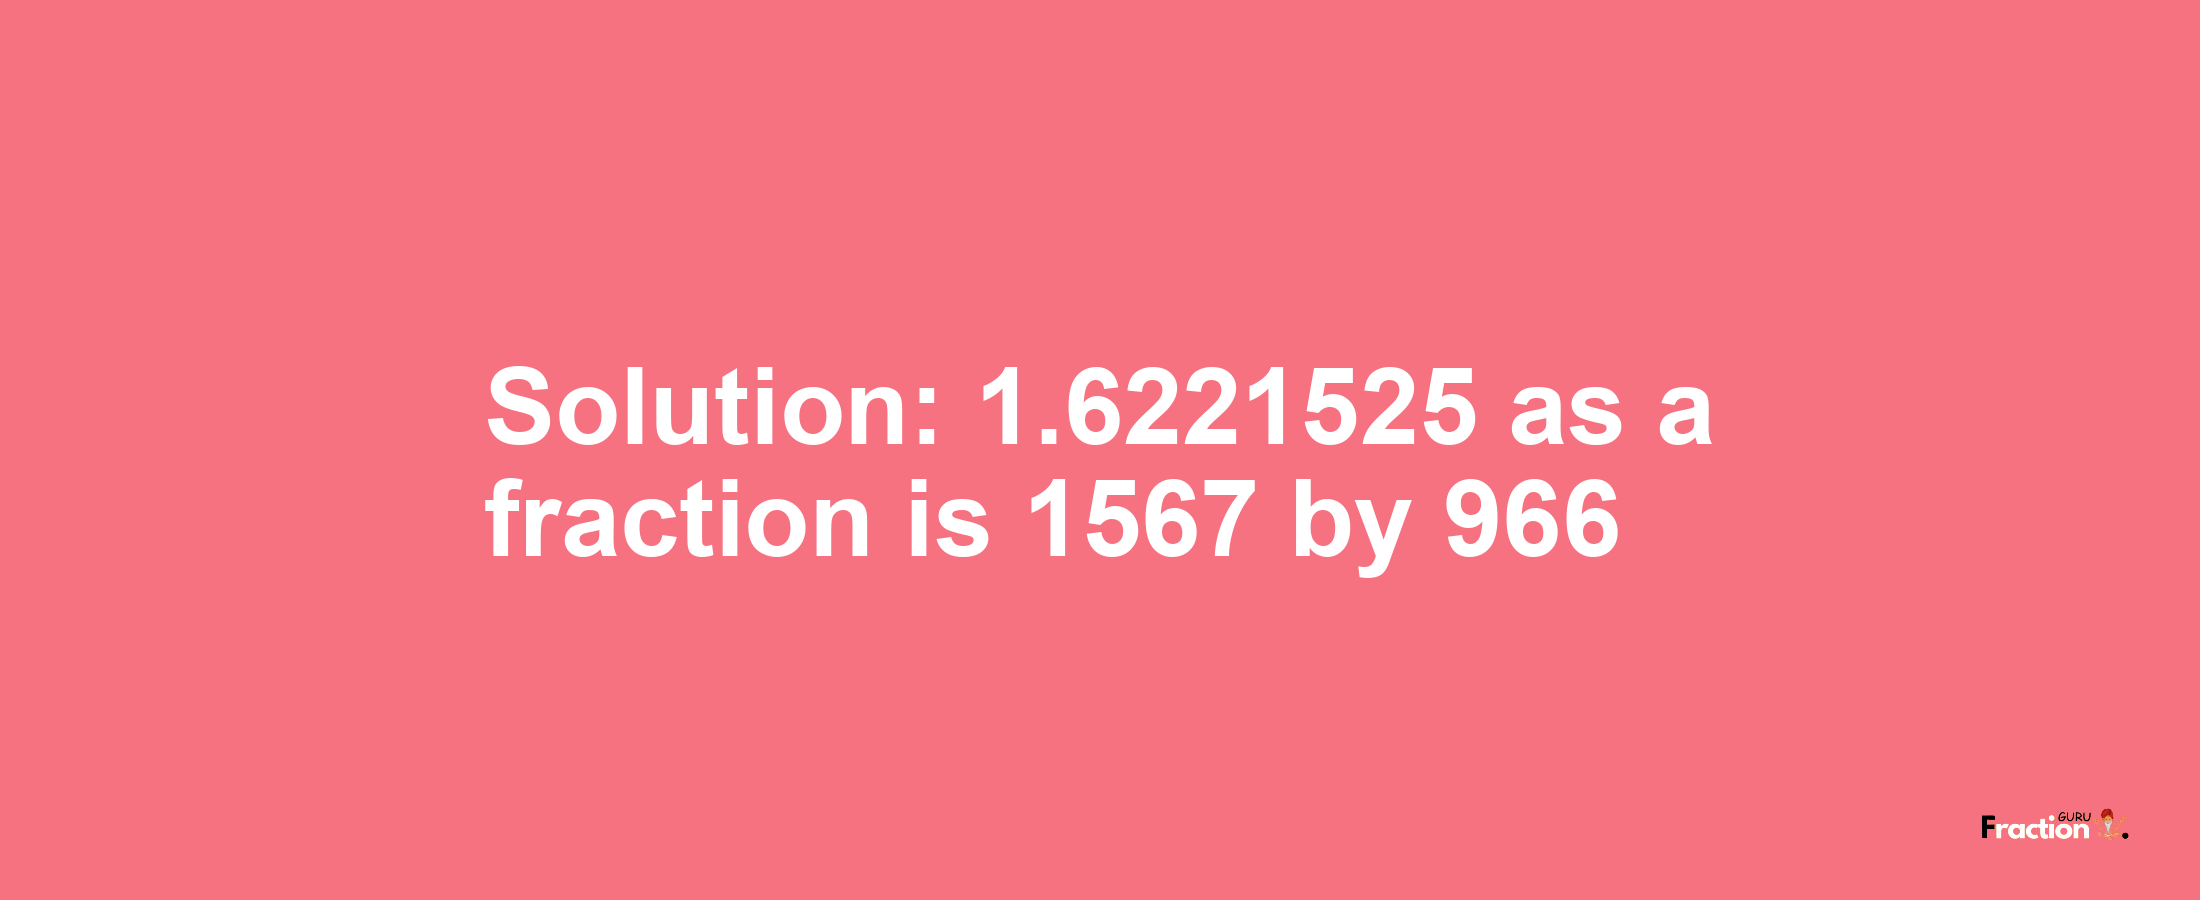 Solution:1.6221525 as a fraction is 1567/966